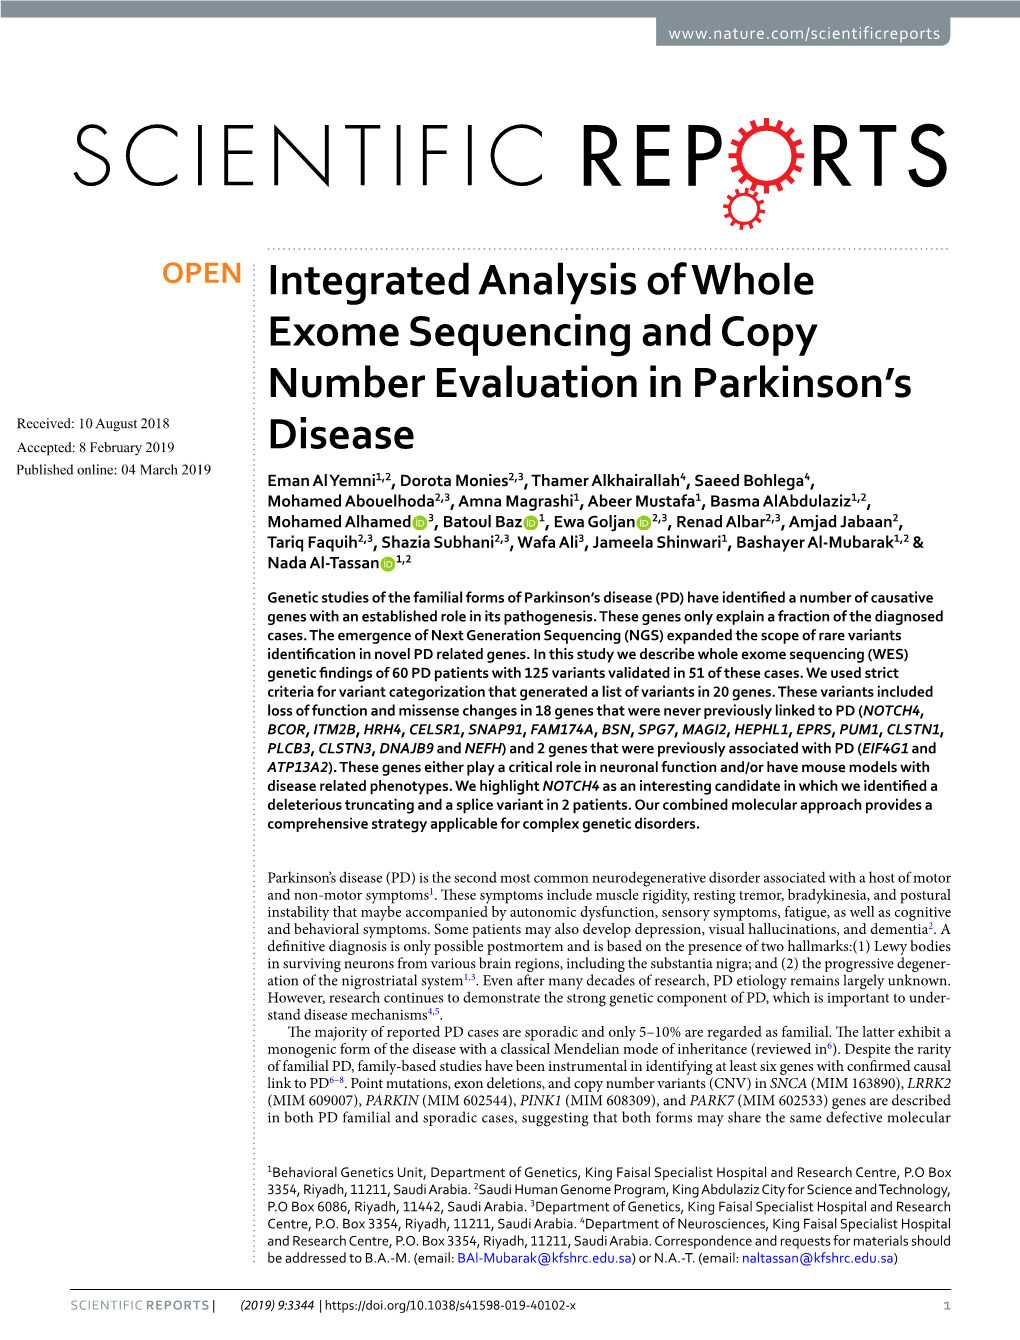 Integrated Analysis of Whole Exome Sequencing and Copy Number